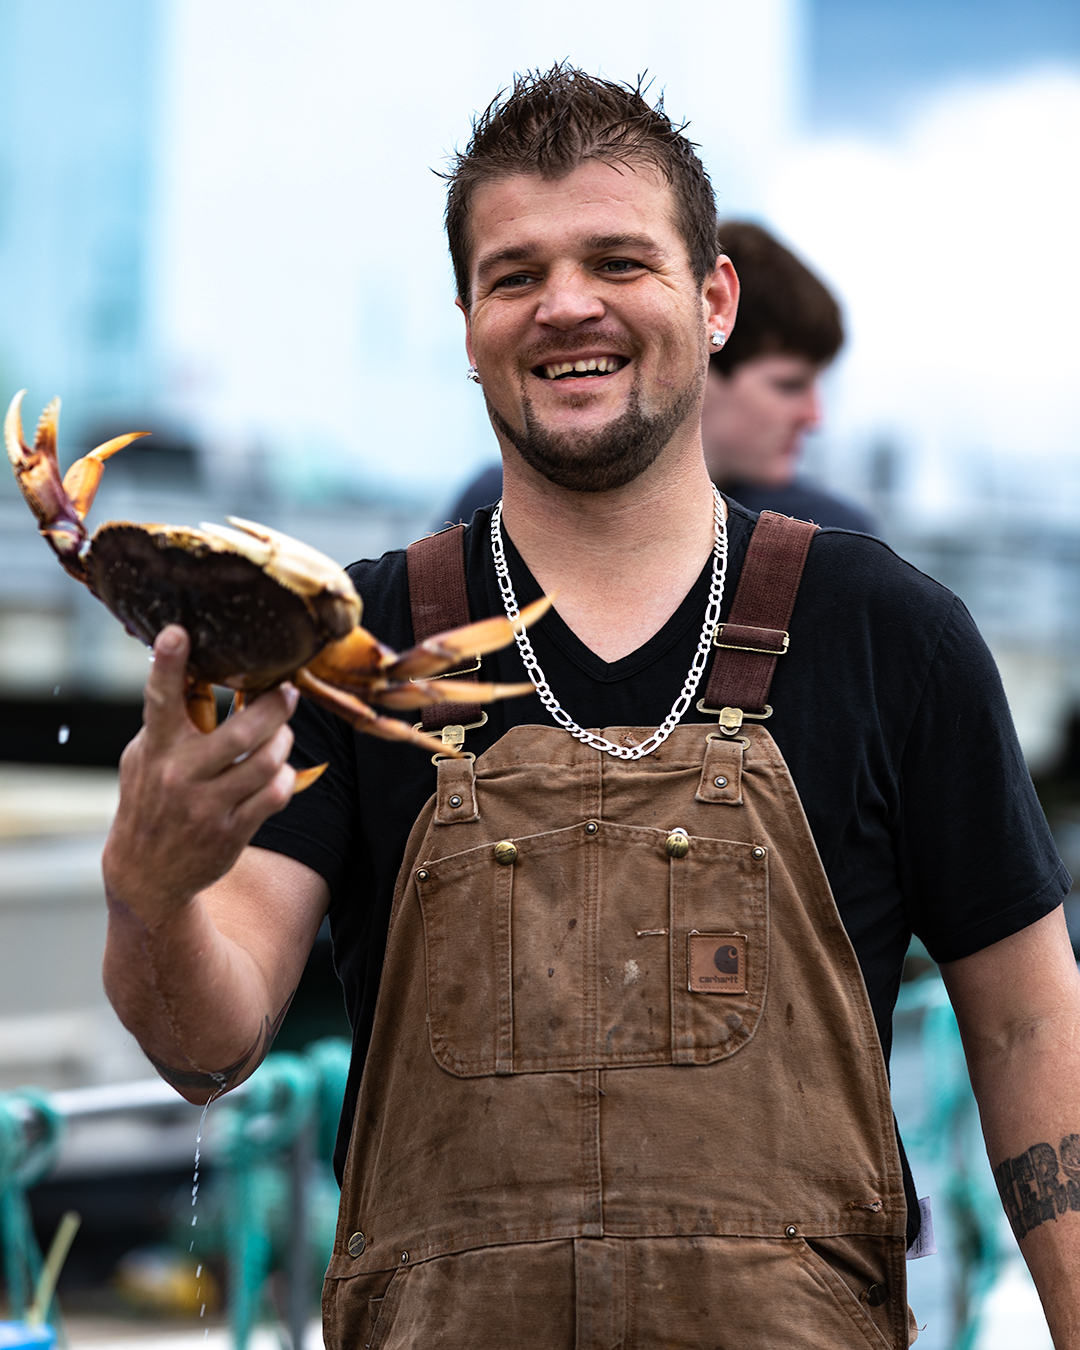 Portrait of Man Holding a Crab in the San Francisco Bay Area